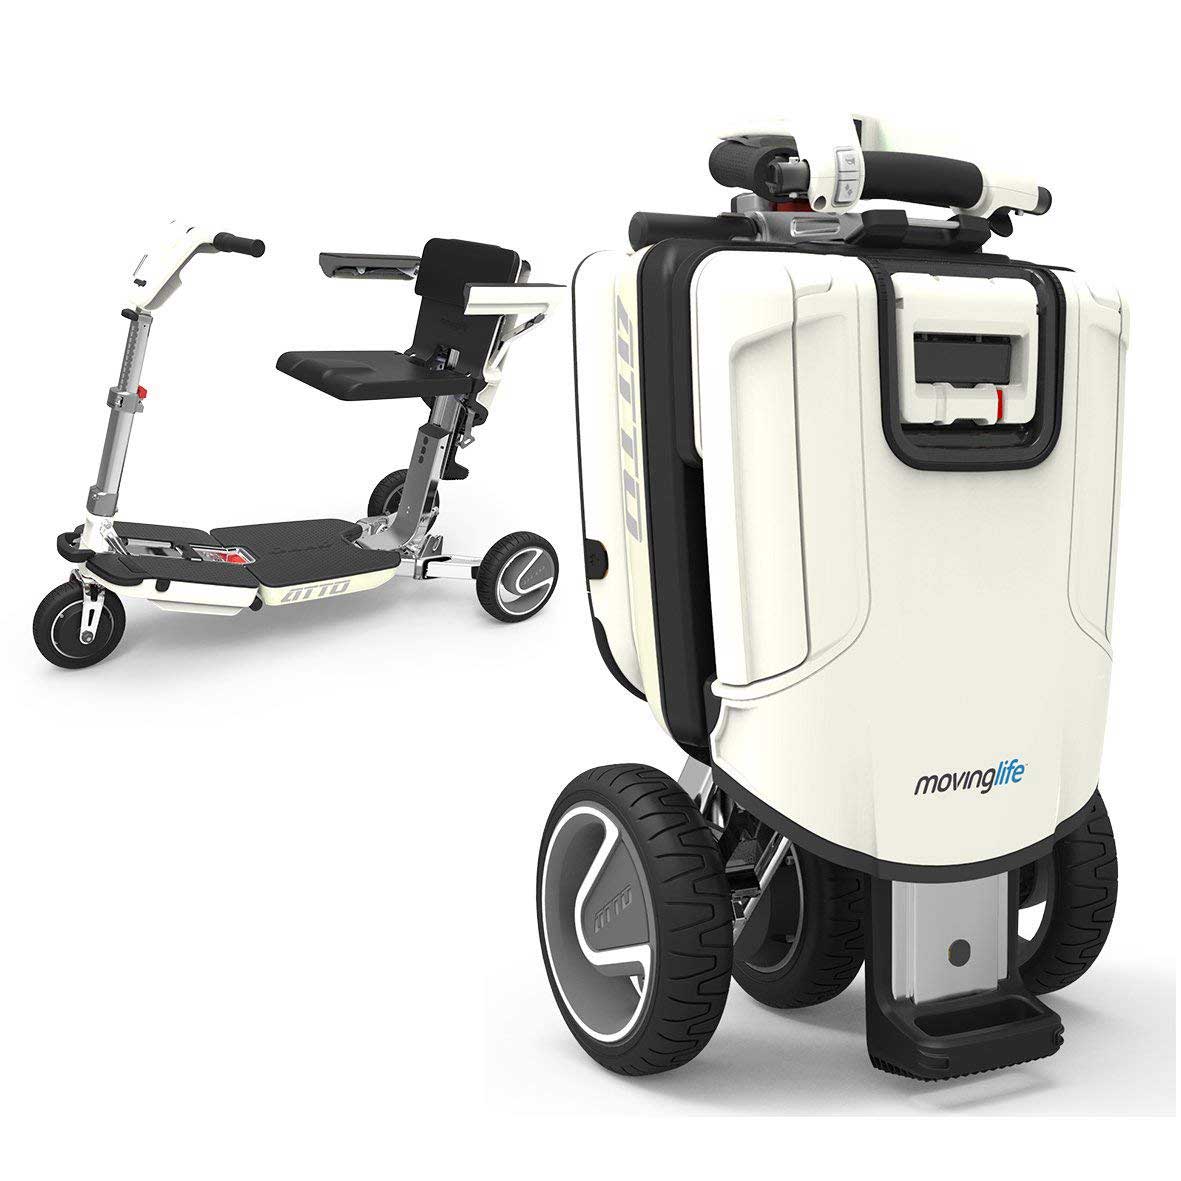 suitcase-scooter-mobility-scooter-pack